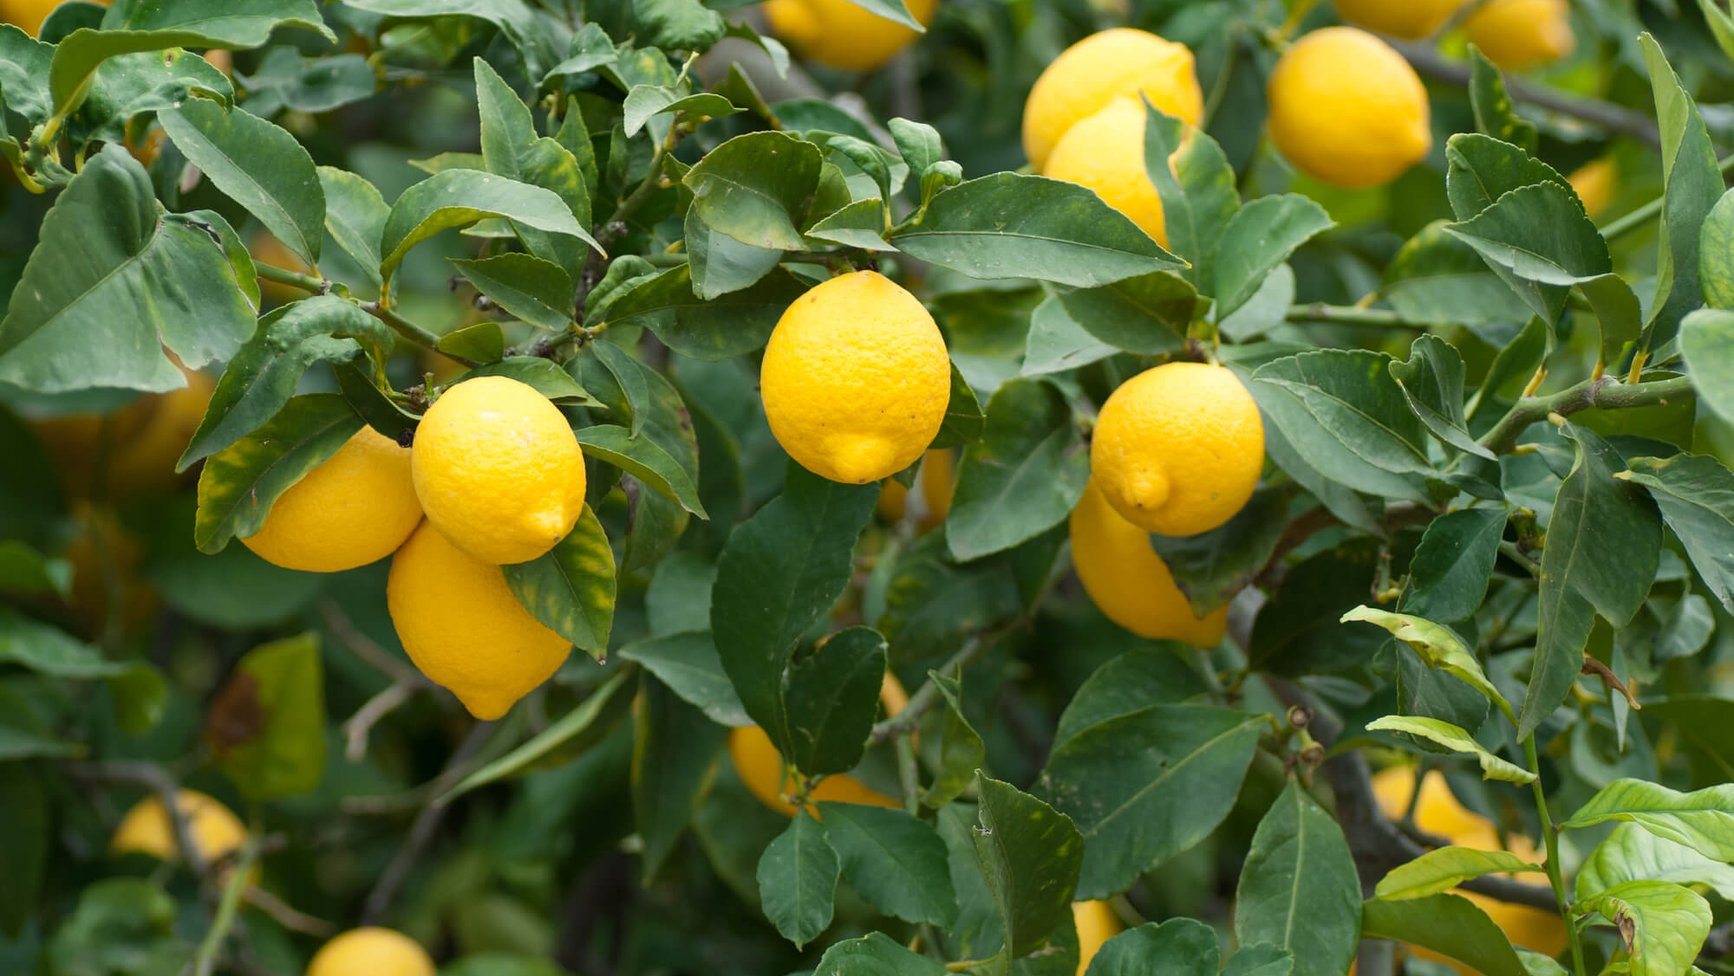 Plant a Lemon Tree Day (15th May, 2021) | Days Of The Year